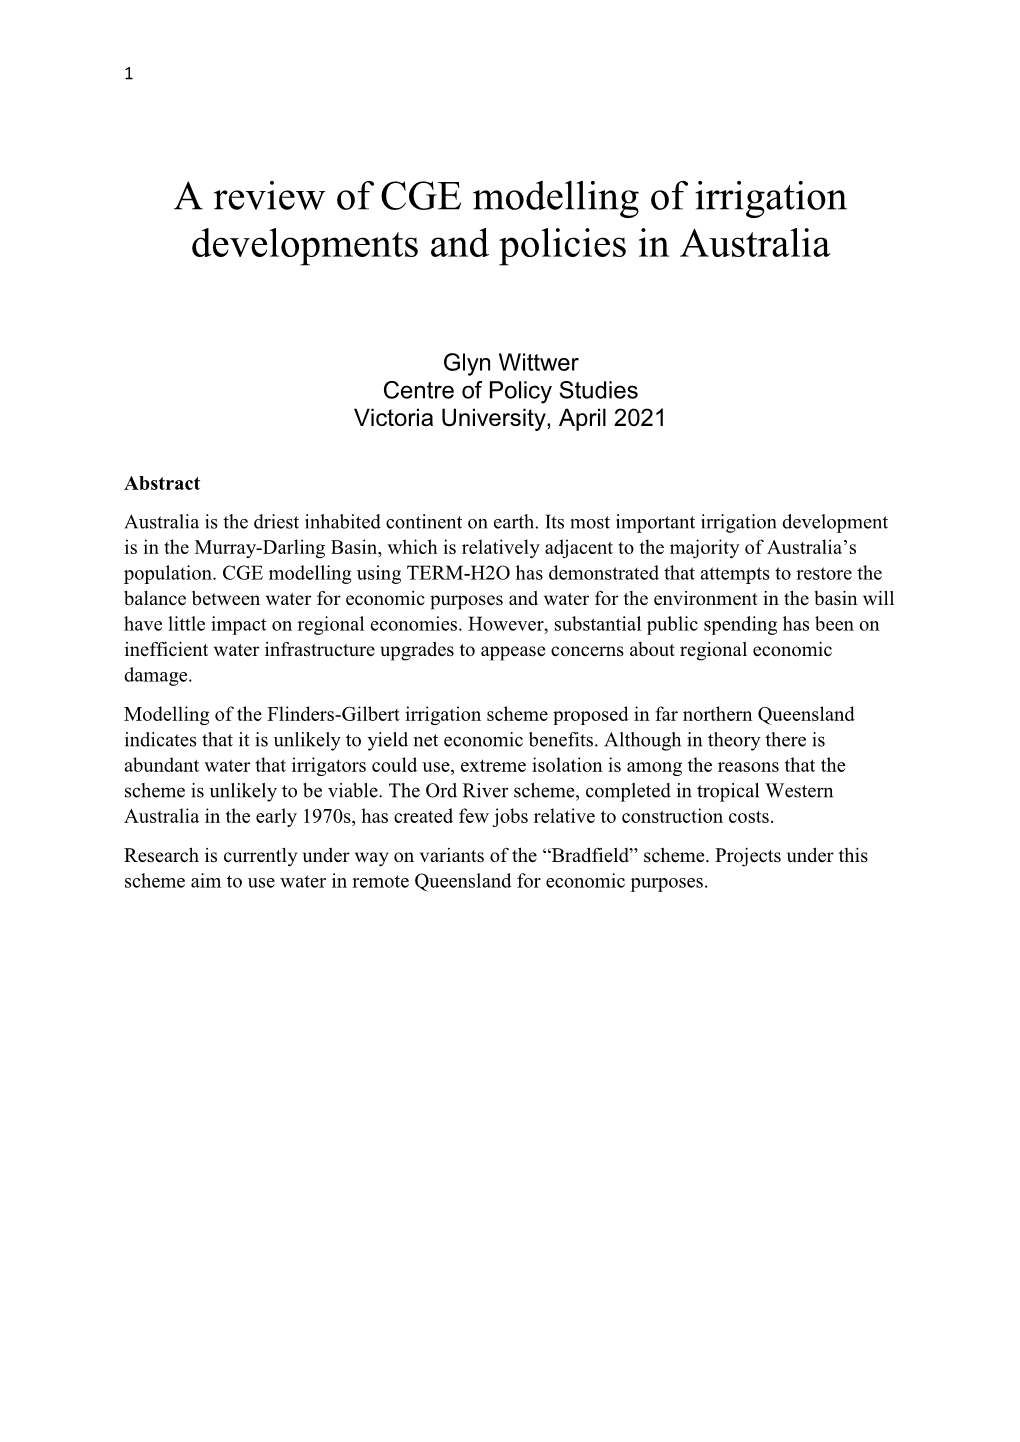 A Review of CGE Modelling of Irrigation Developments and Policies in Australia